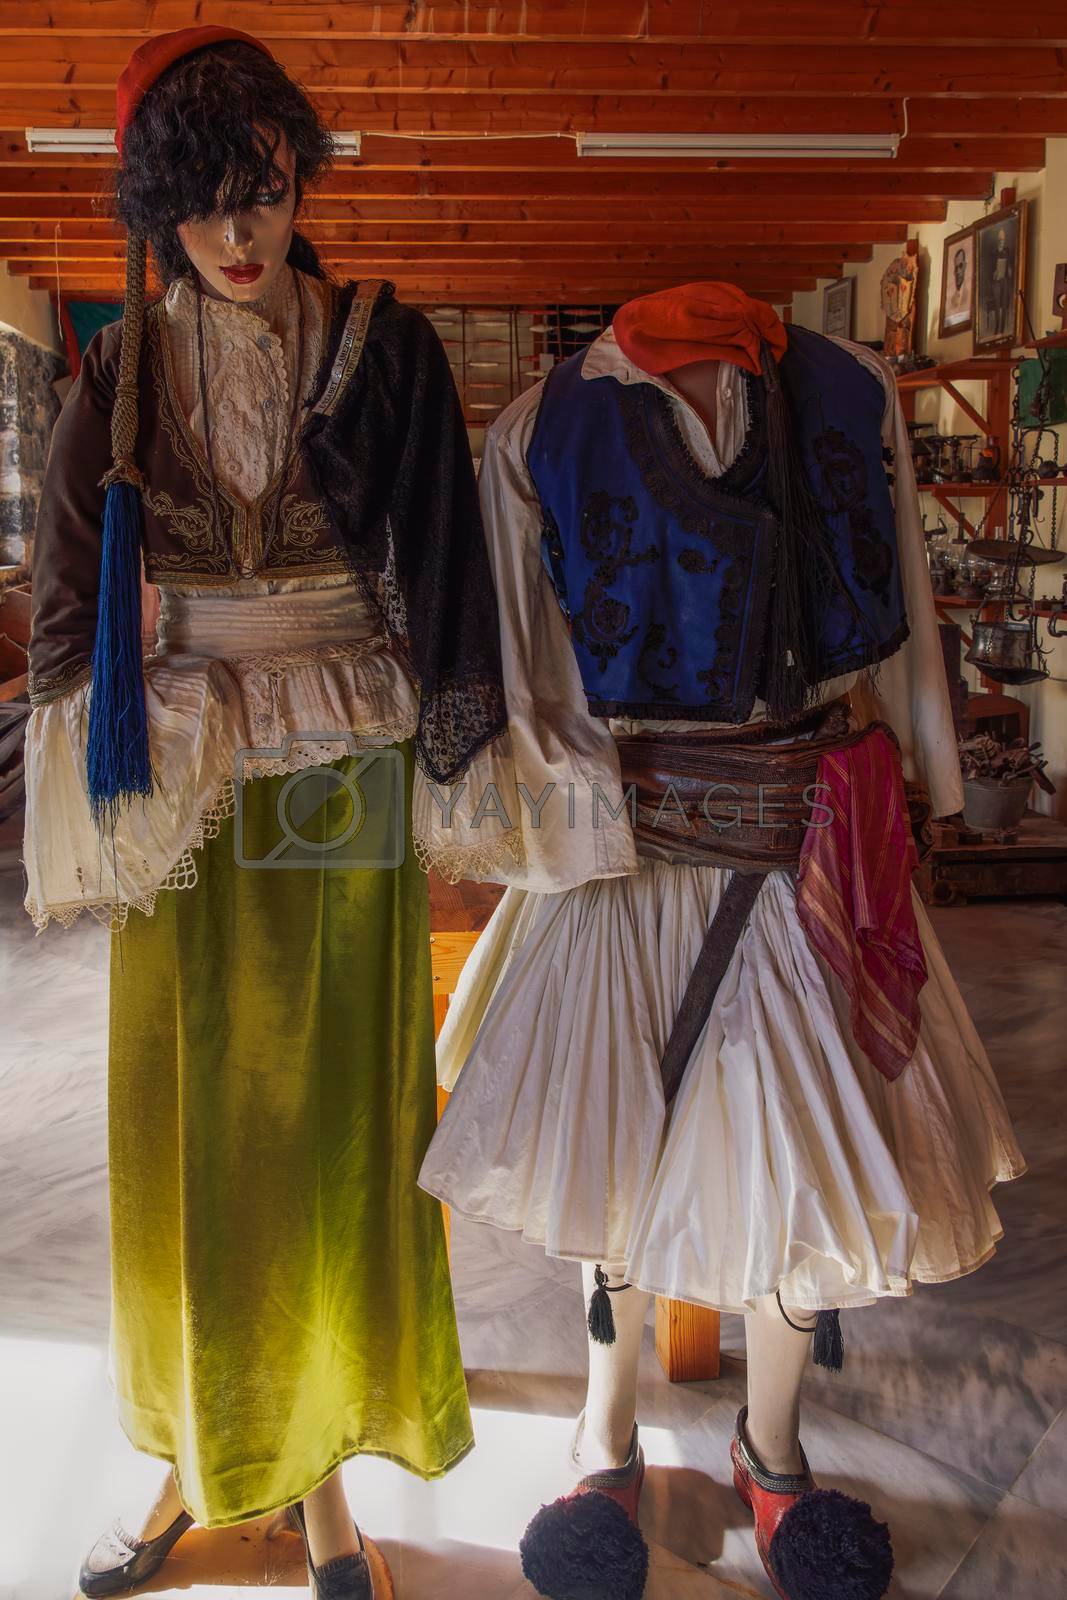 Vytina, Greece Folklore Museum interior, displaying traditional 18th century Greek clothes and fustanella from the history culture of the area in Arcadia, Peloponnese Greece.